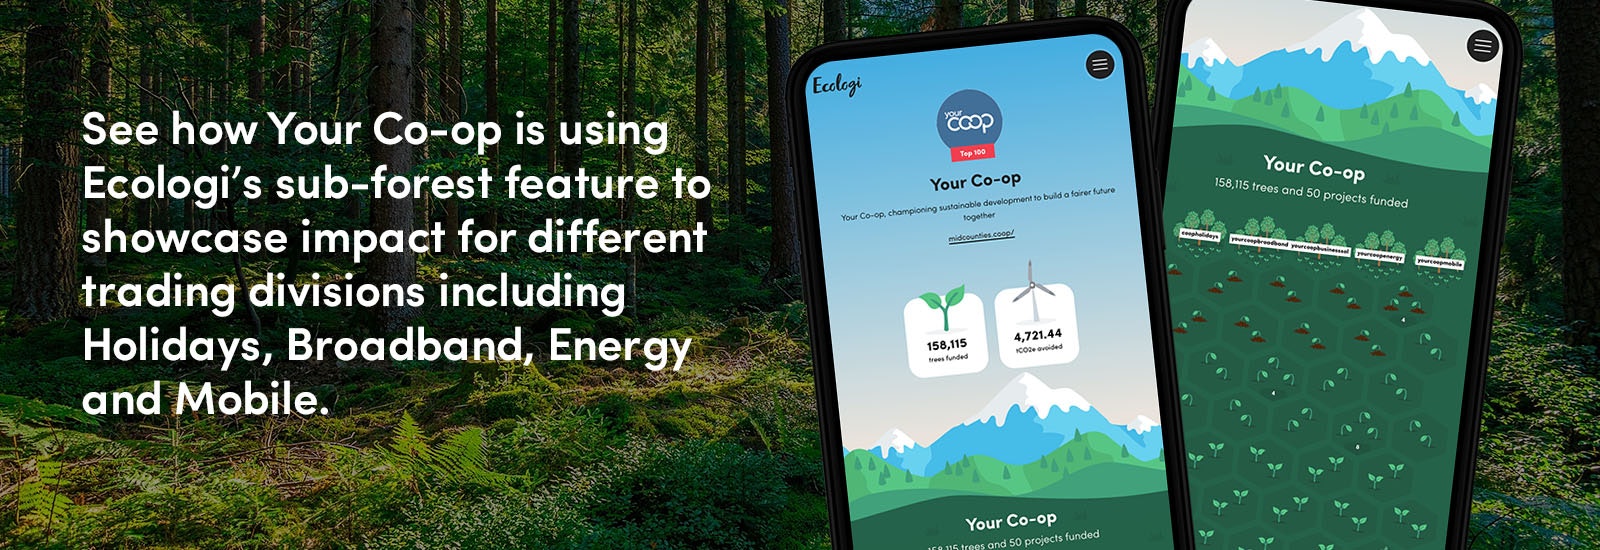 See how Your Co-op is using Ecologi's sub-forest feature to showcase impact for different trading divisions including Holidays, Broadband, Energy and Mobile.